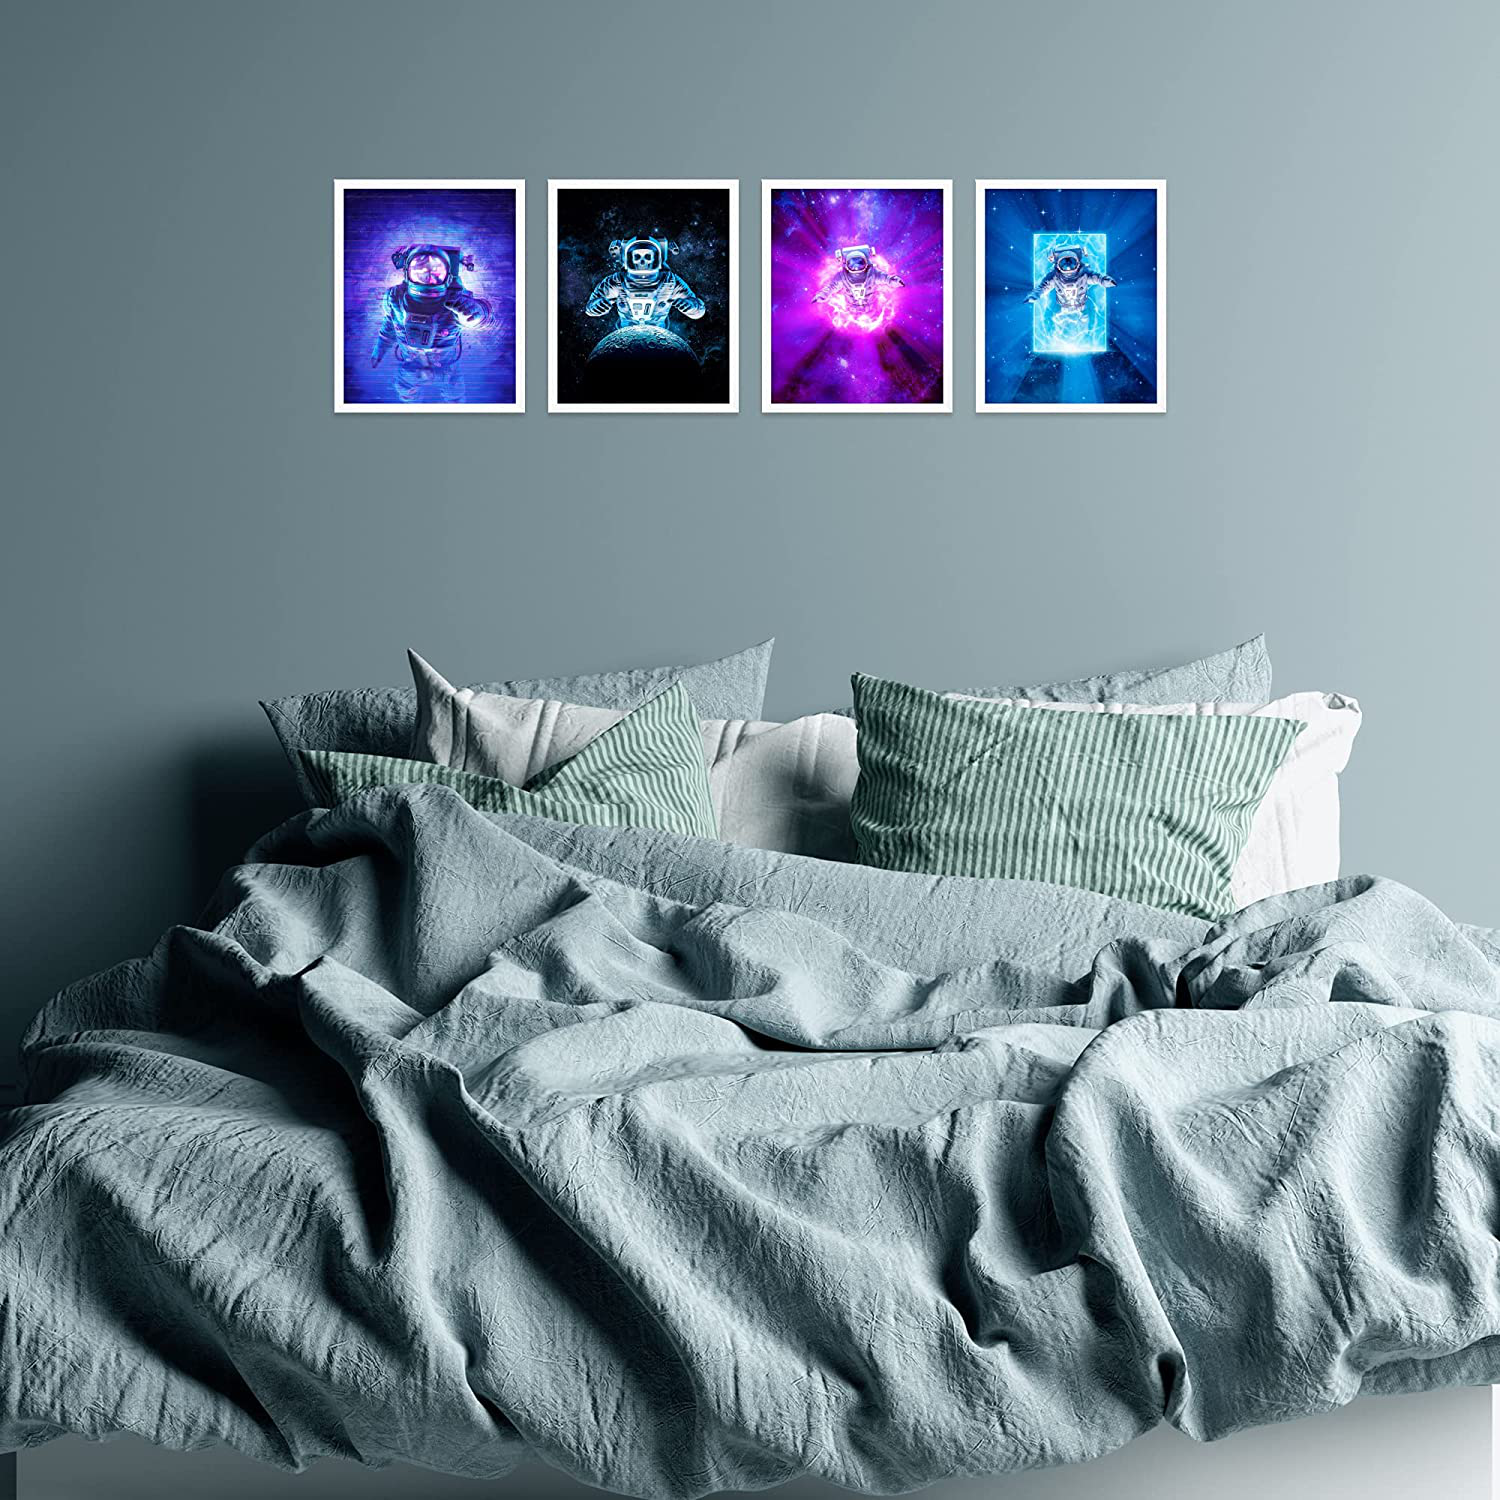 Space Wall Decor - Space Poster, Set of 4 Space Wall Art Prints - Space Posters for Walls - Astronaut Wall Art, UNFRAMED, (8x10") - Space Wall Decor Kids, Kids Space Wall Art, Galaxy Art - Bright